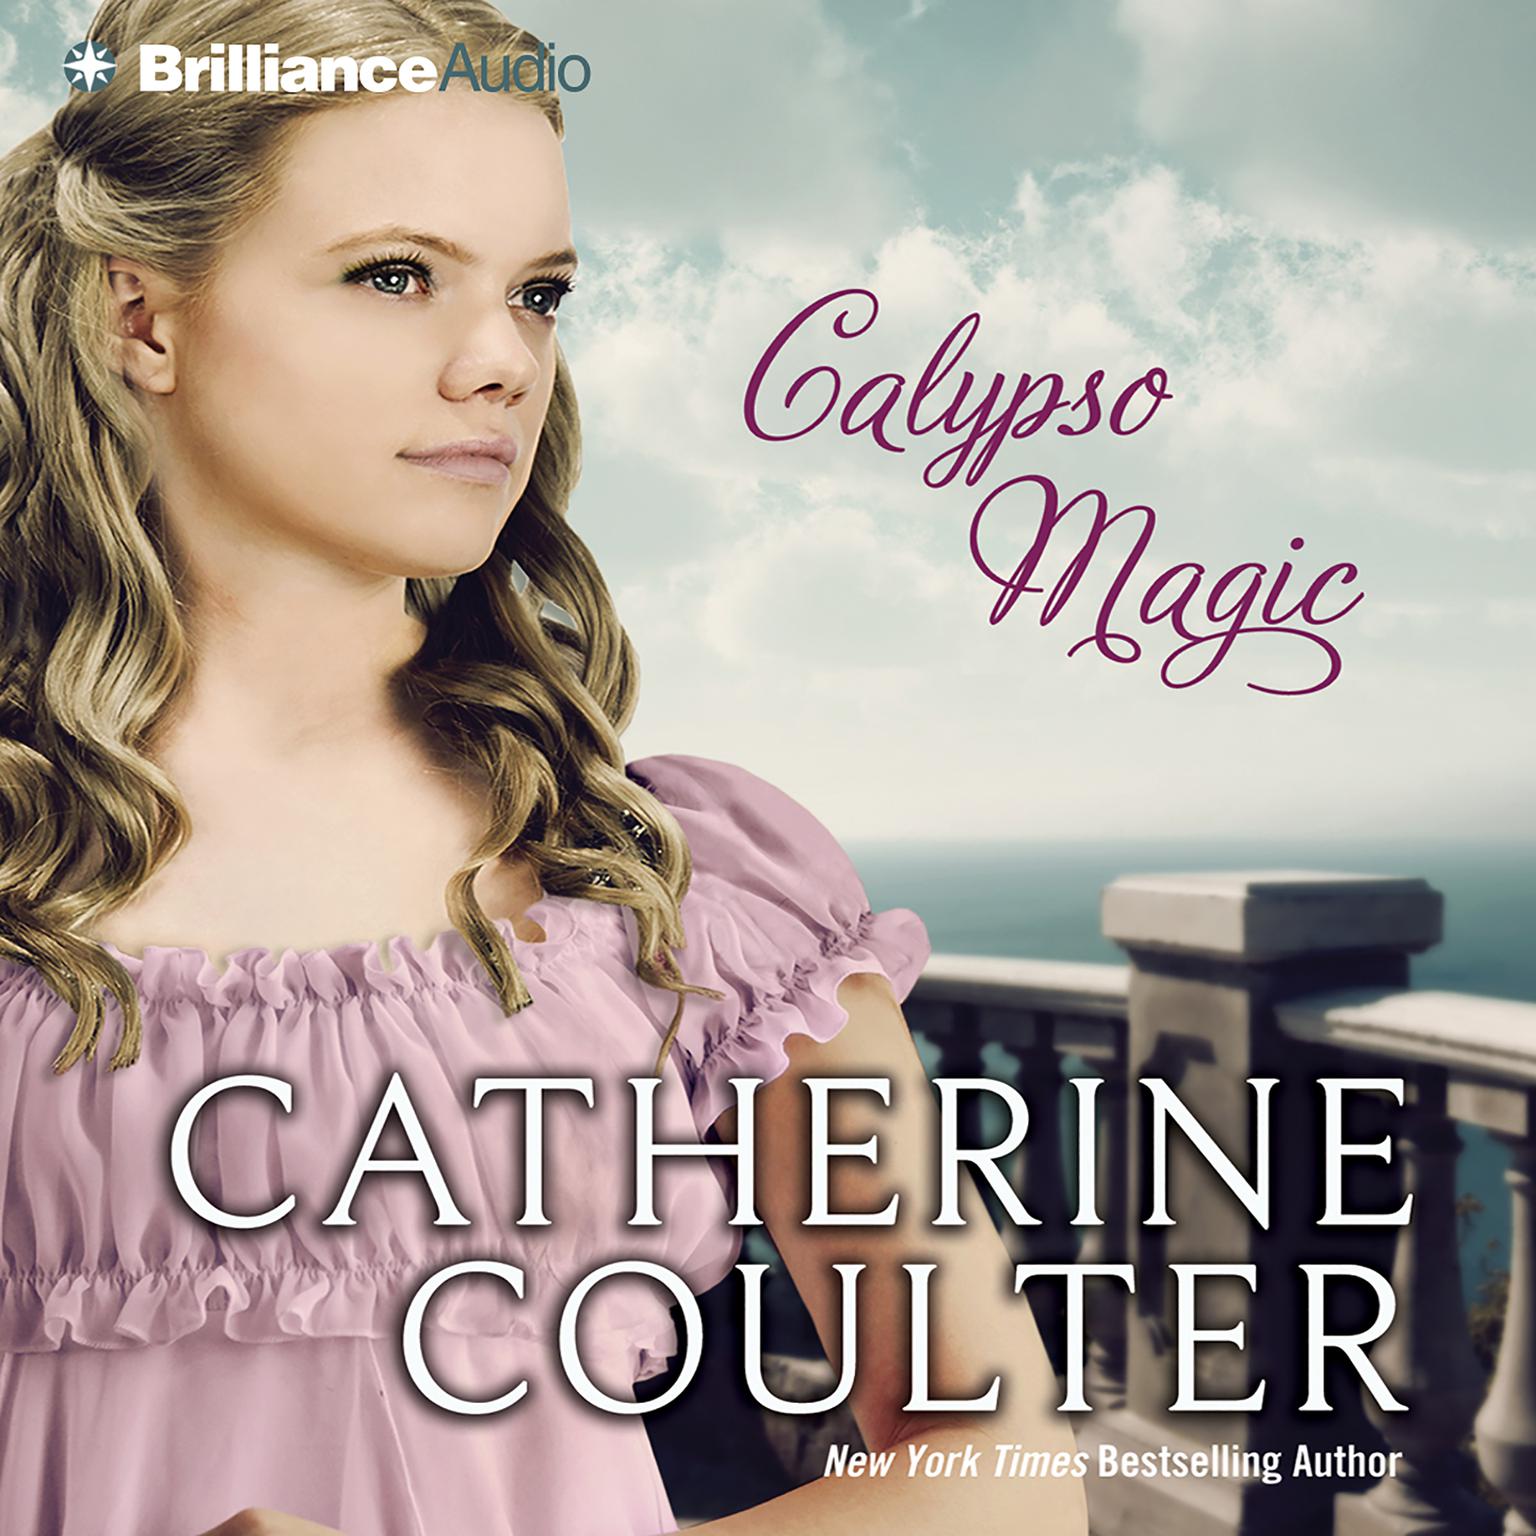 Calypso Magic (Abridged) Audiobook, by Catherine Coulter